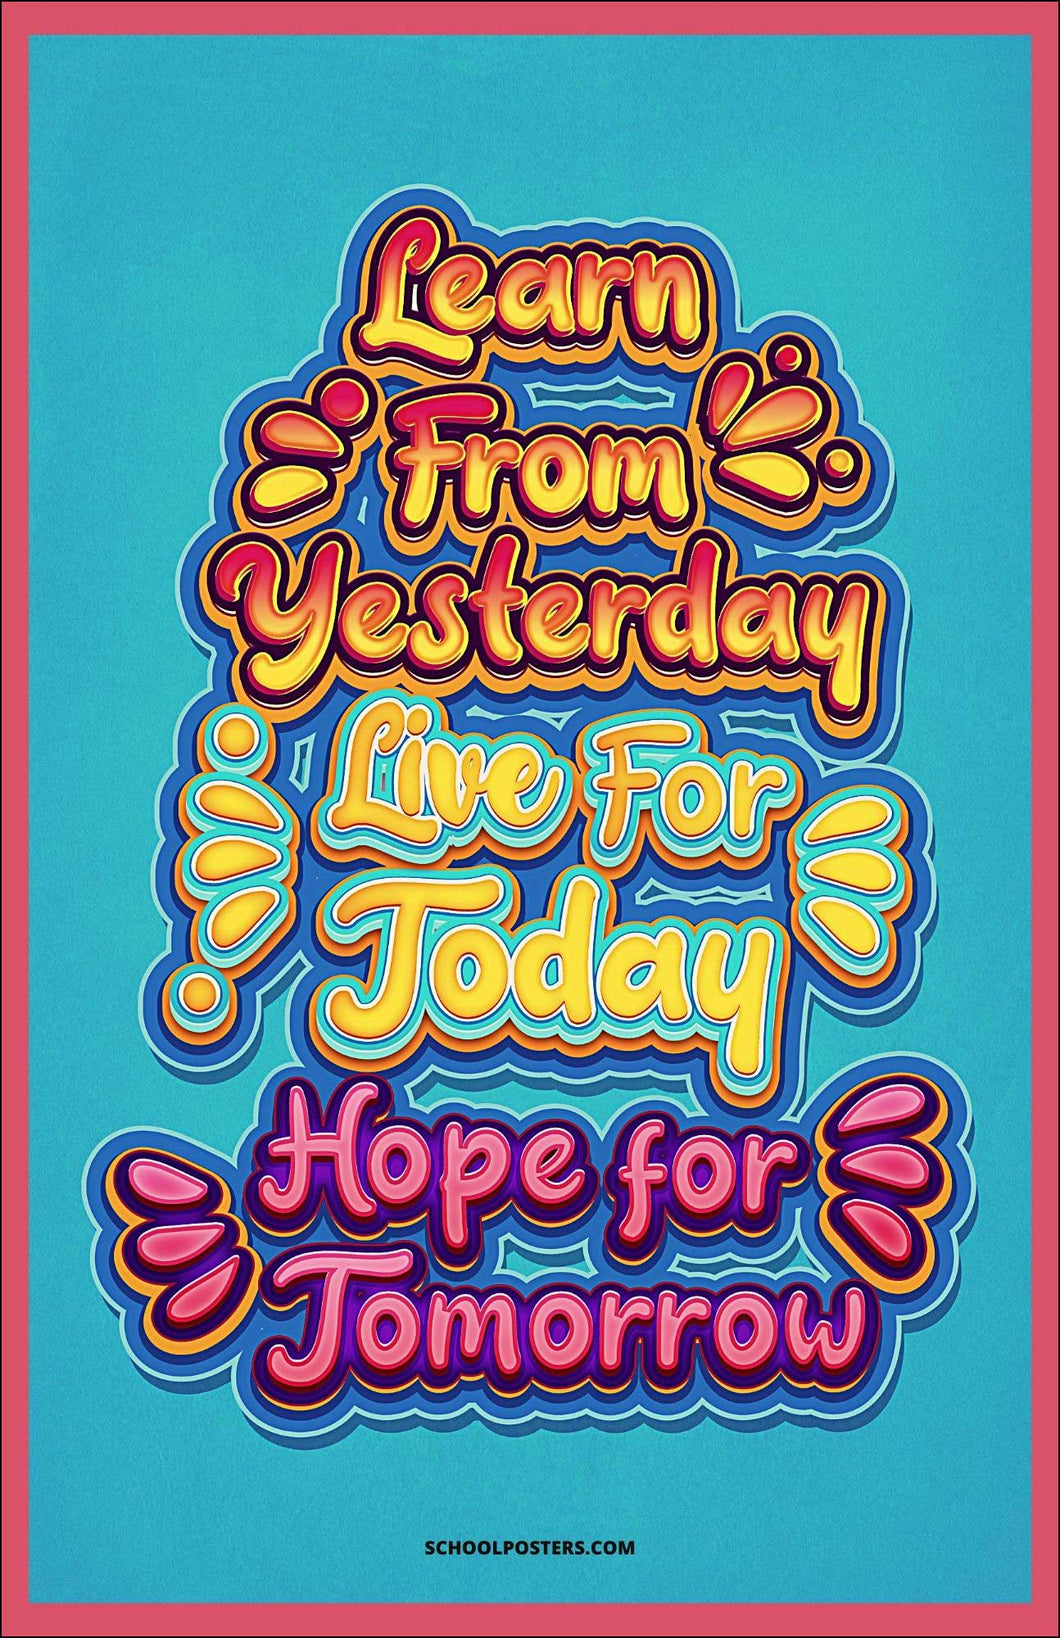 Yesterday Today Tomorrow Poster